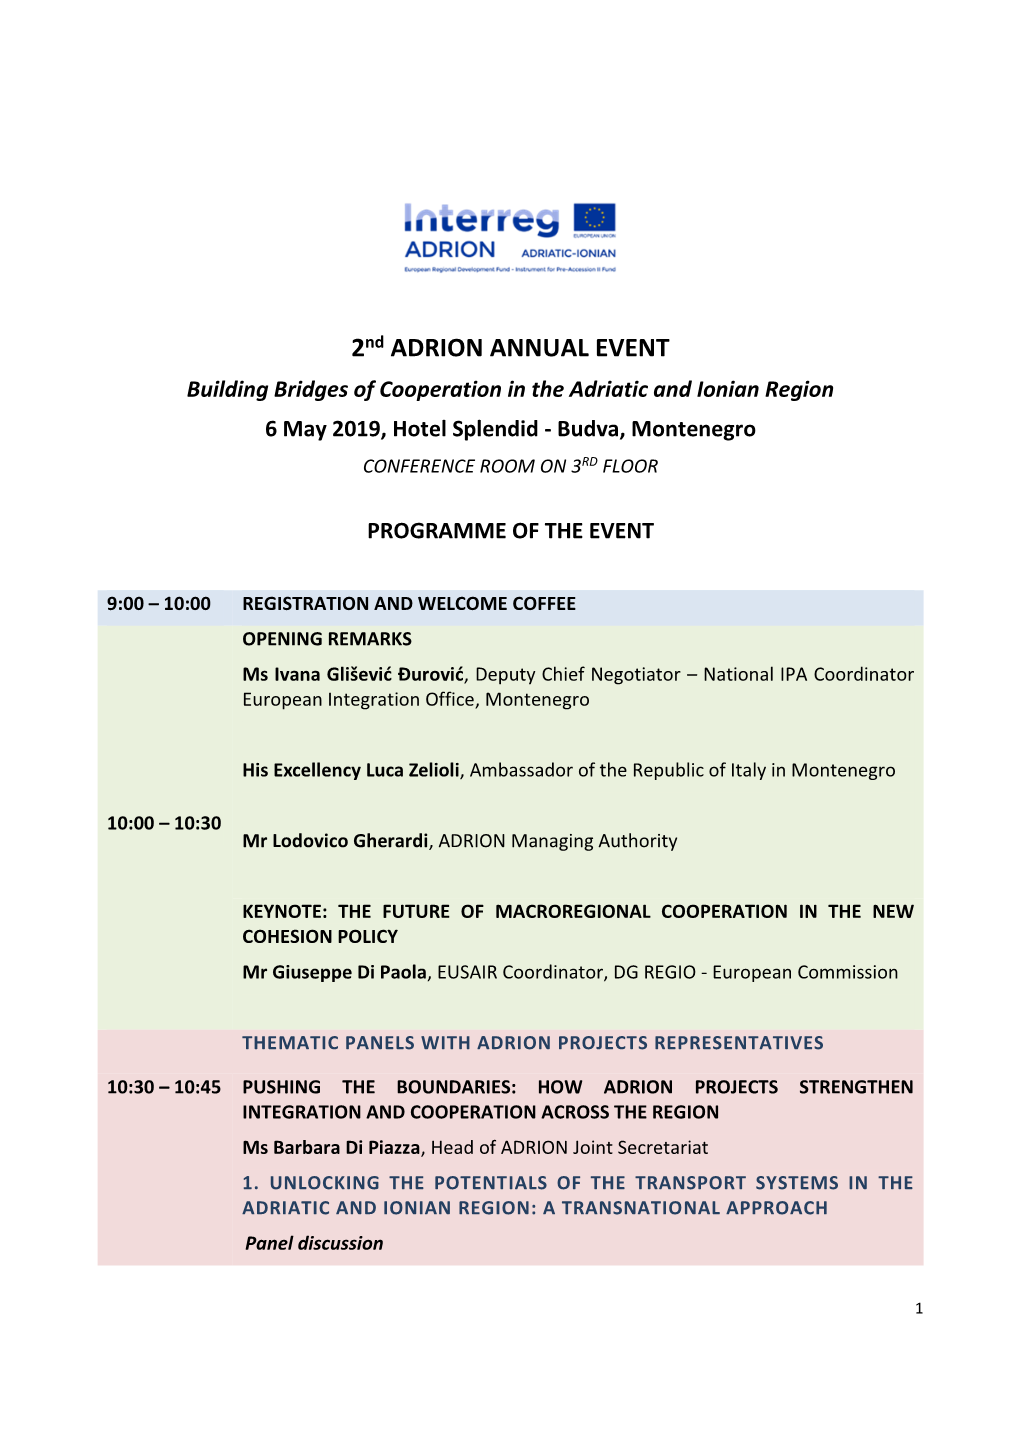 2Nd ADRION ANNUAL EVENT Building Bridges of Cooperation in the Adriatic and Ionian Region 6 May 2019, Hotel Splendid - Budva, Montenegro CONFERENCE ROOM on 3RD FLOOR